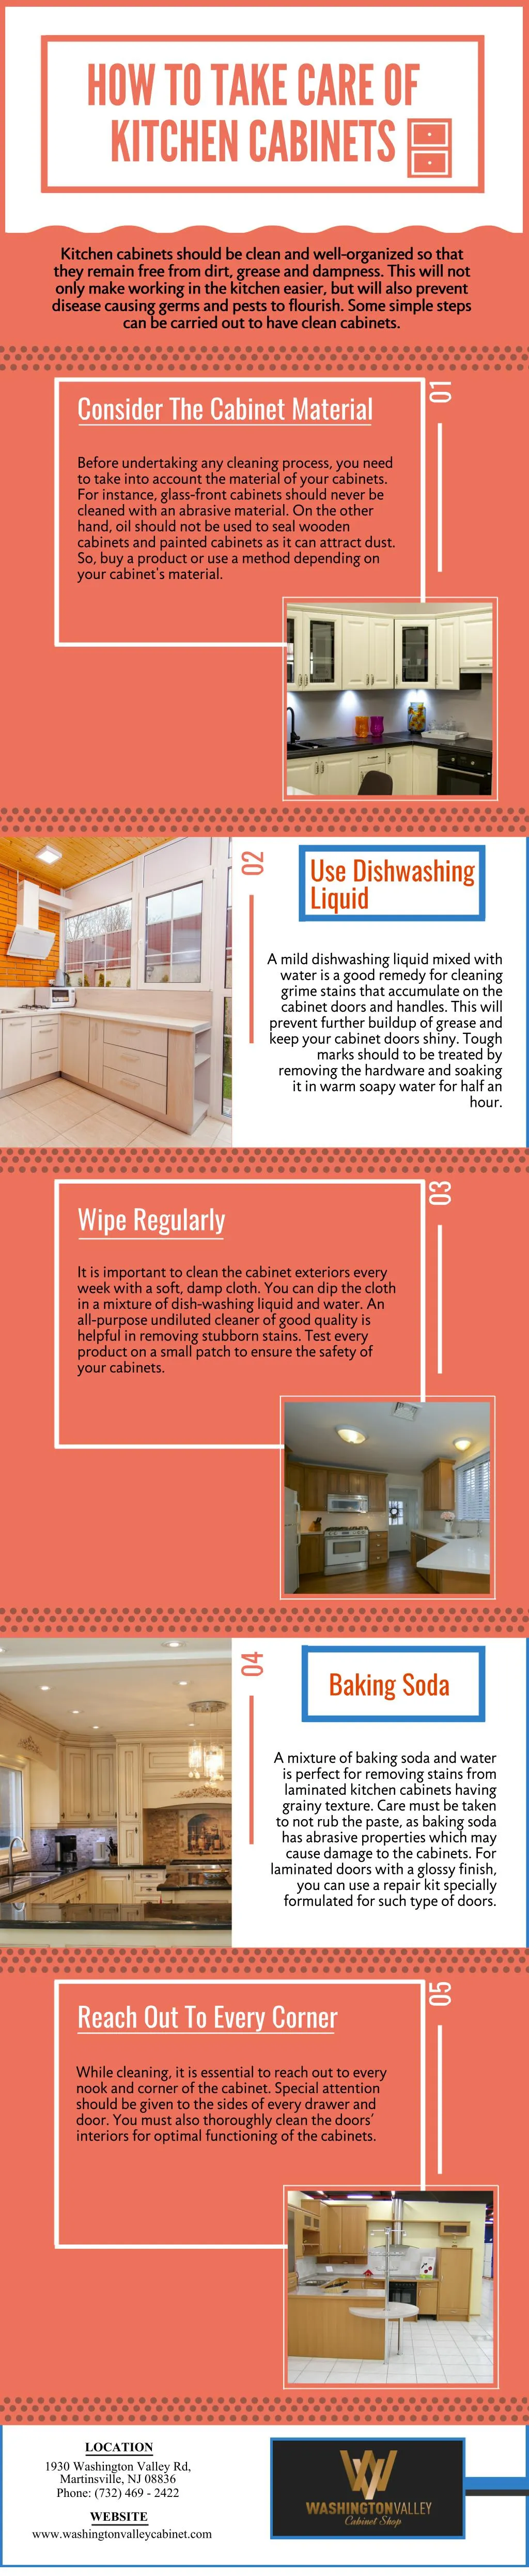 how to take care of kitchen cabinets